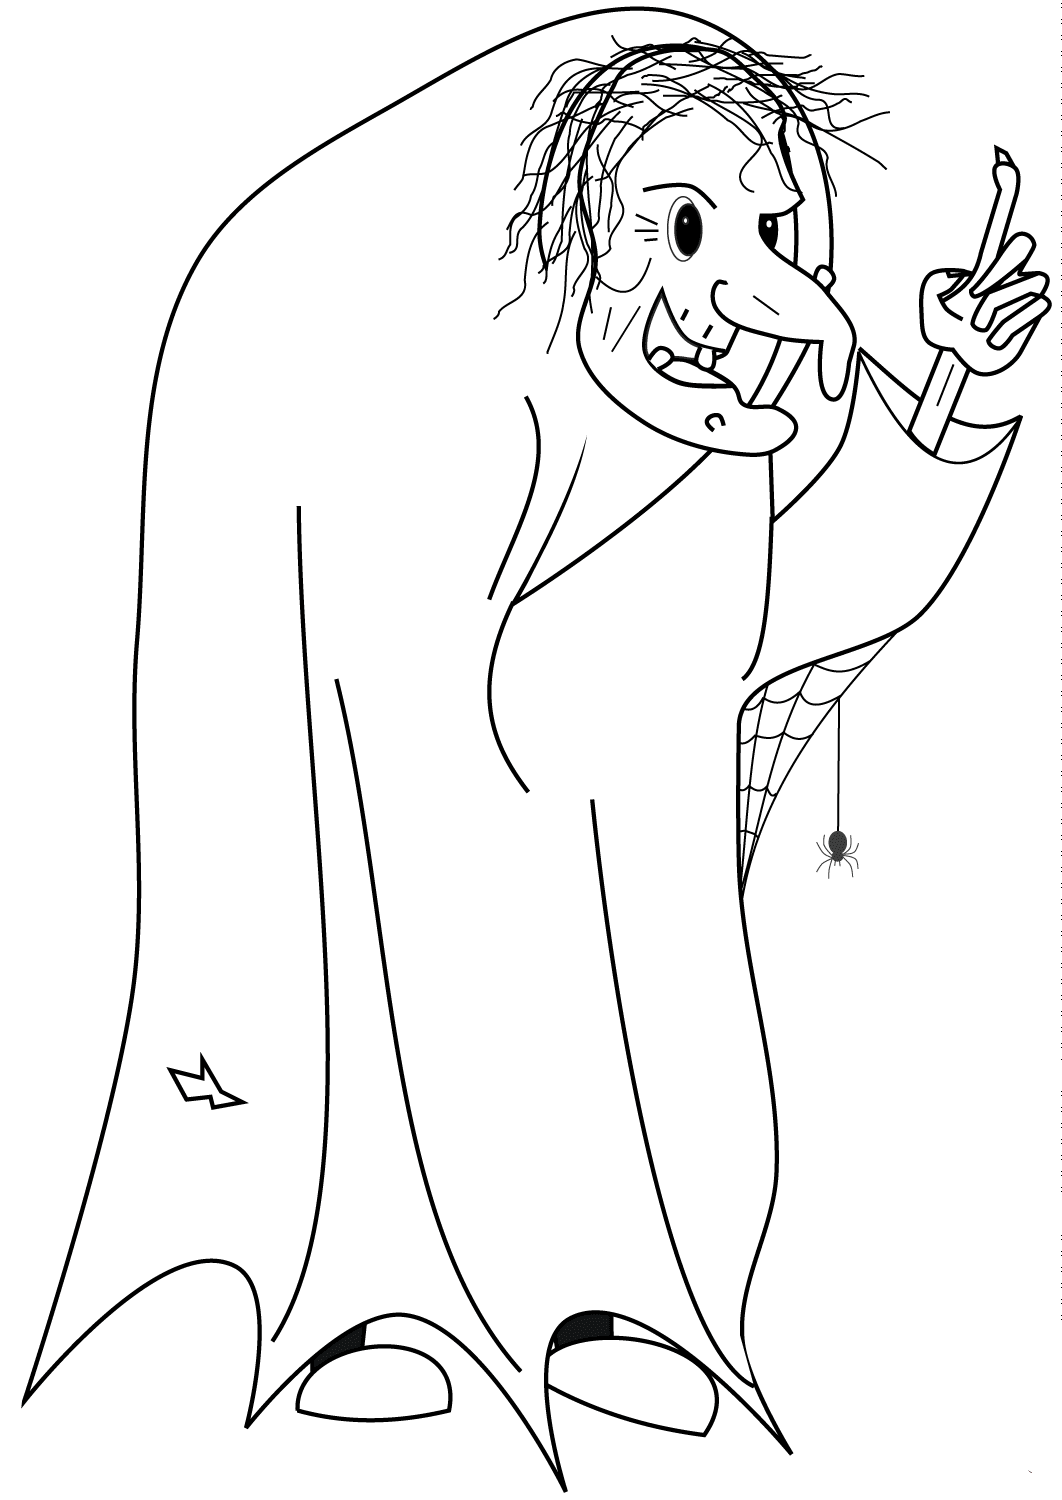 Old witch coloring page